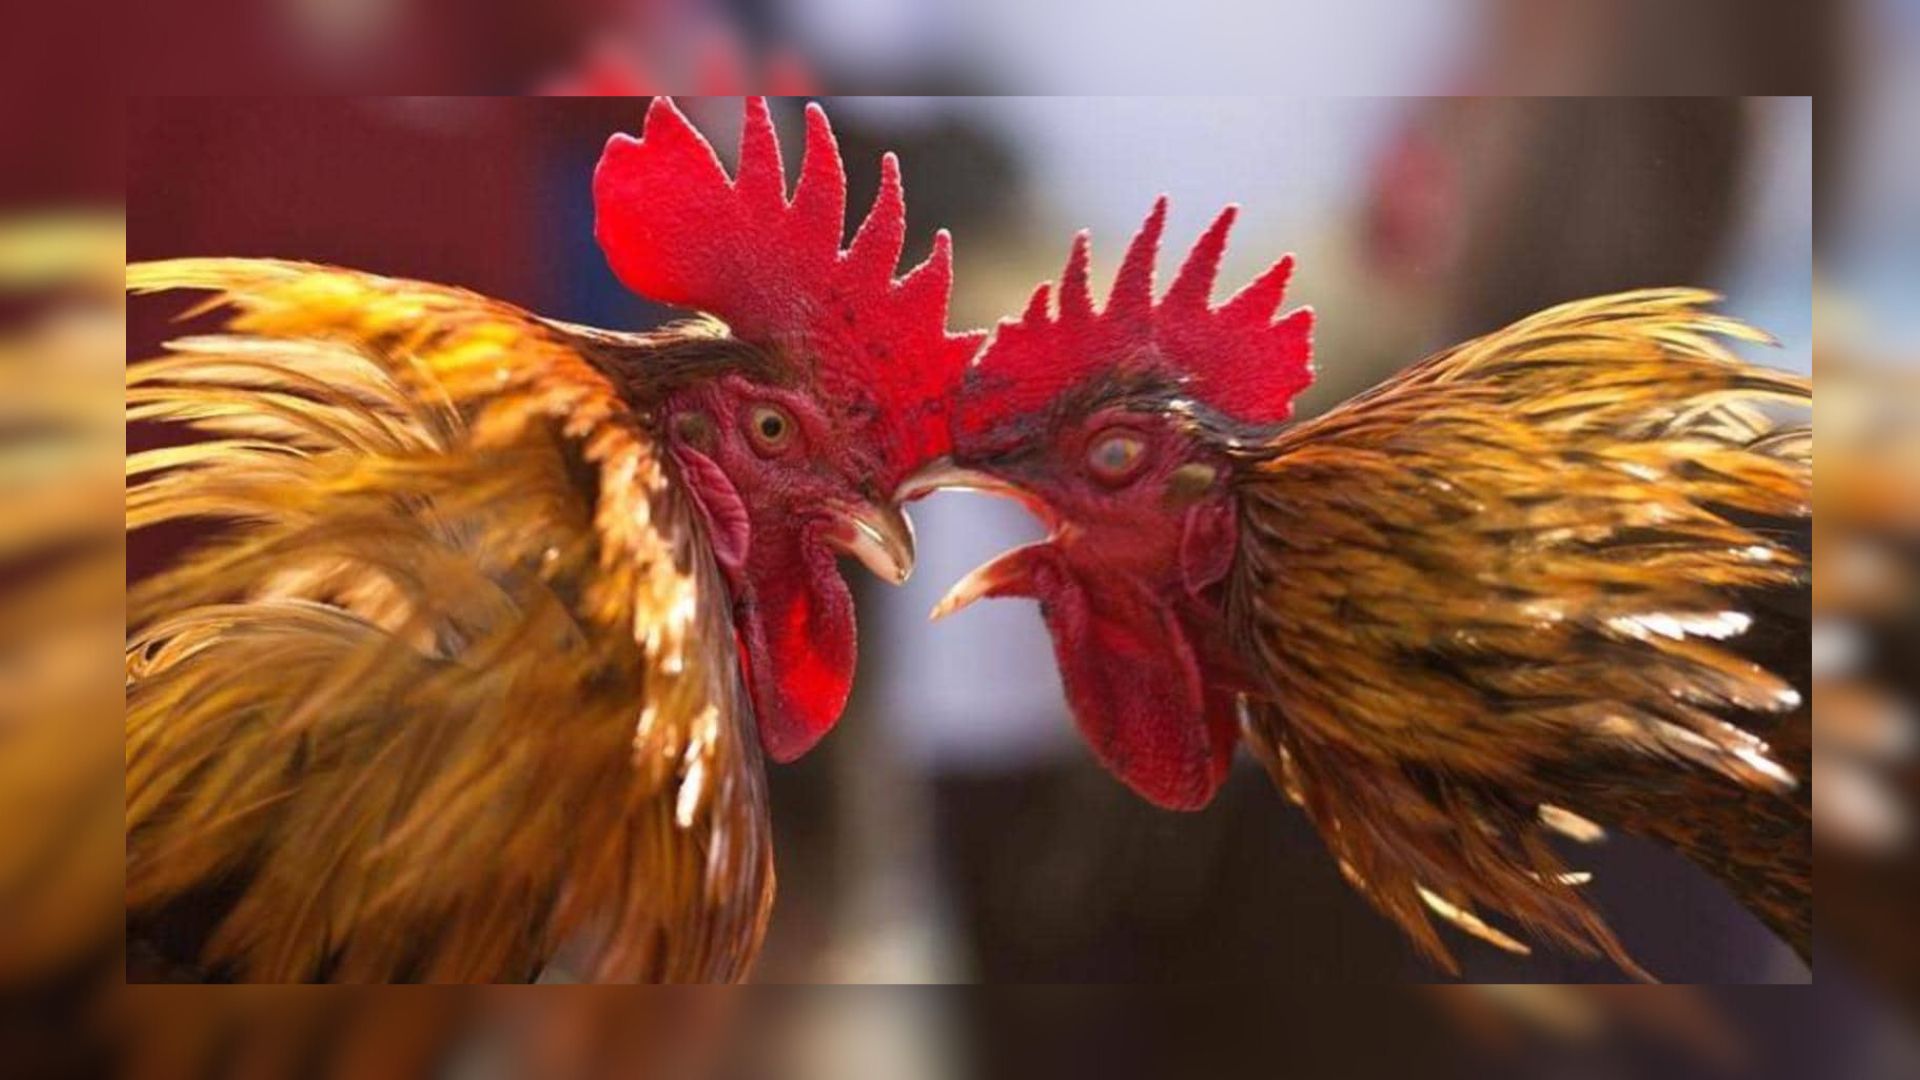 Andhra farmers raise concerns over the rooster fight tradition